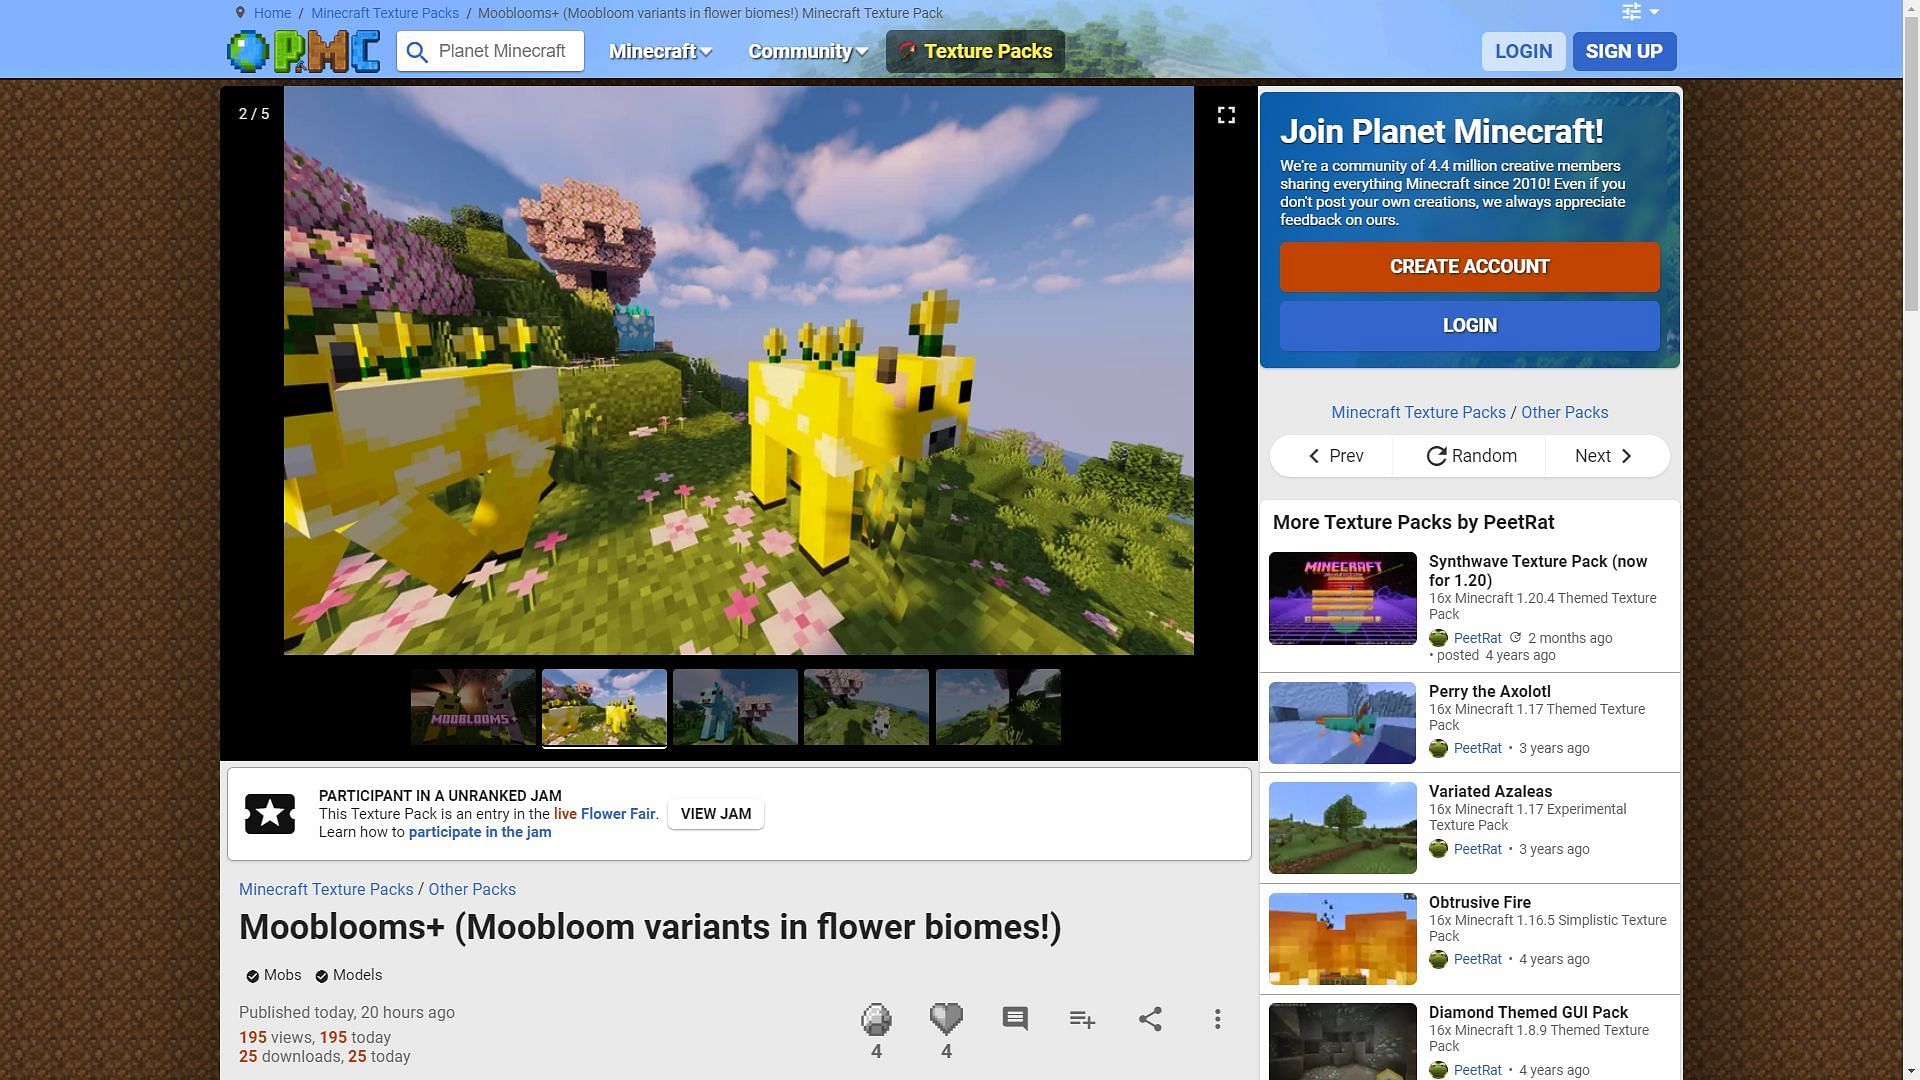 You can download the Moobloom+ texture pack from various websites (Image via PlanetMinecraft)